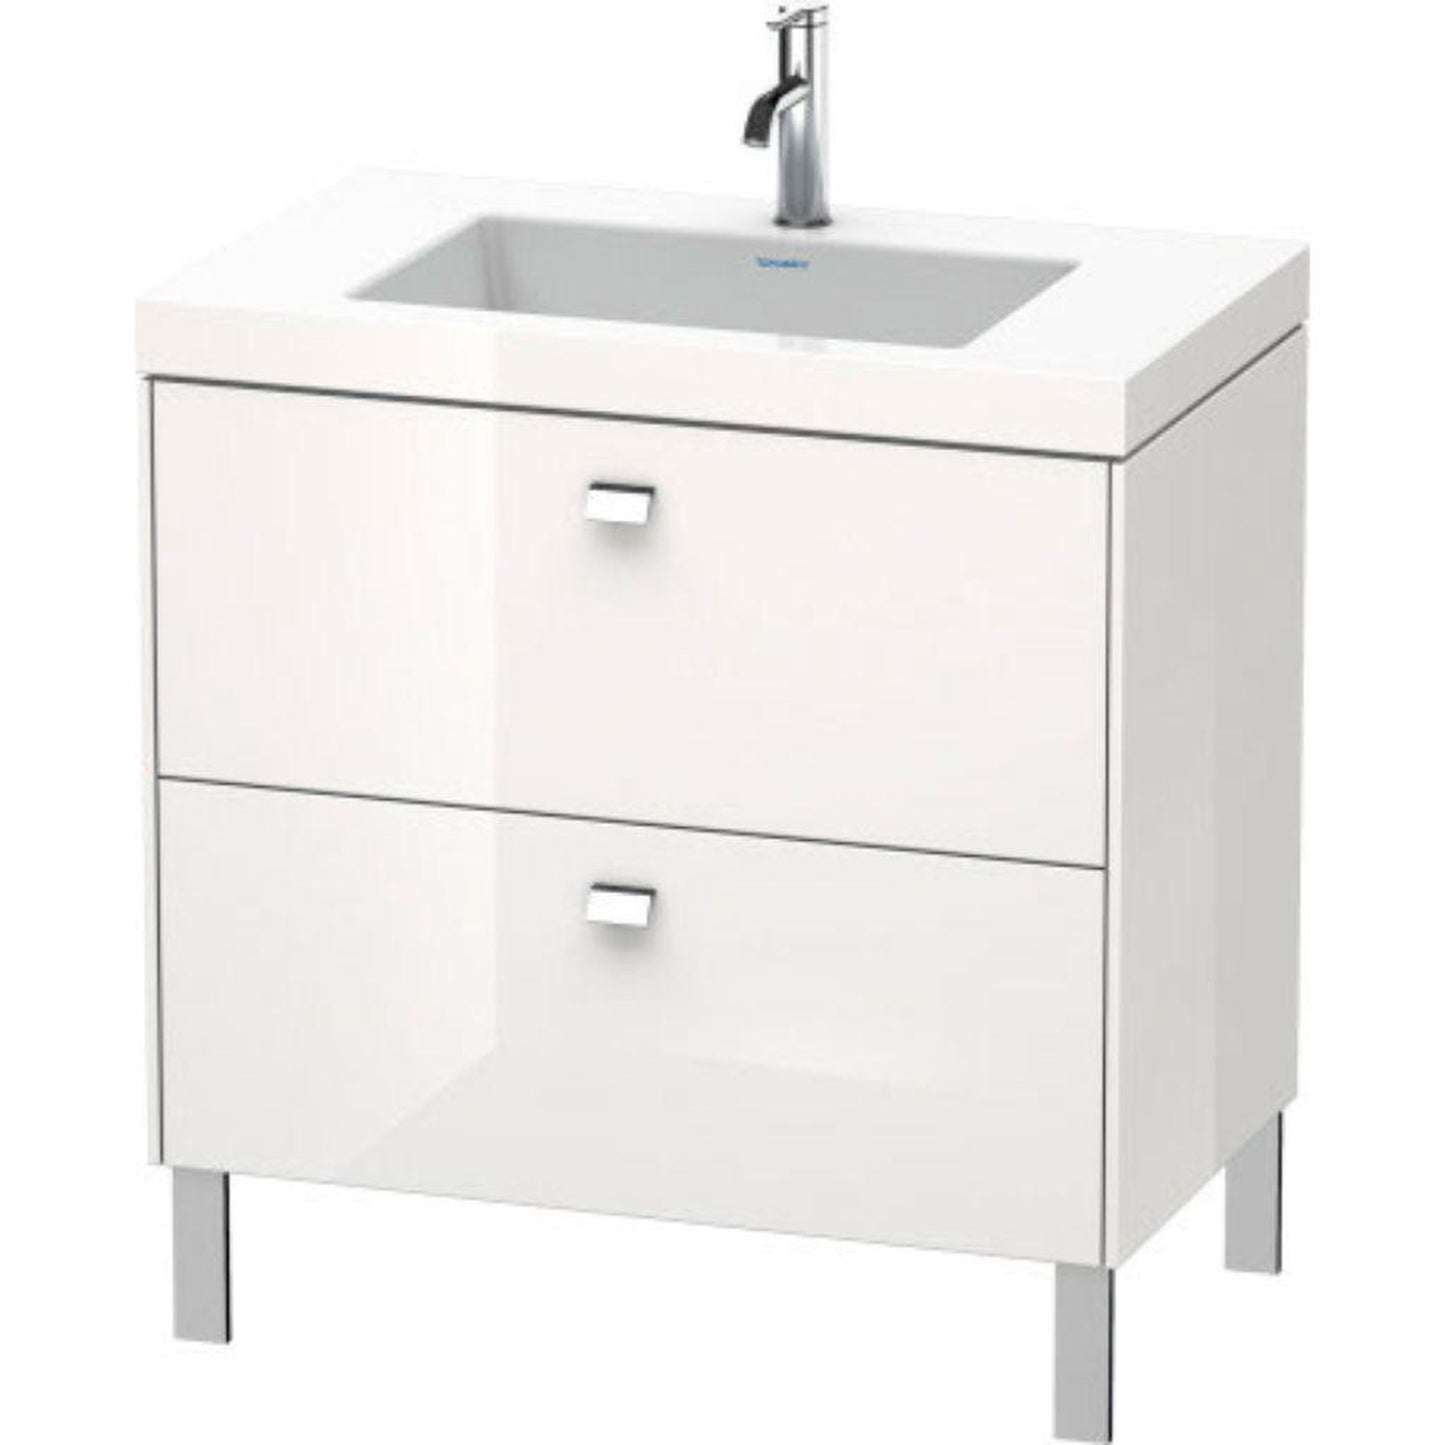 Duravit Brioso 31" x 28" x 19" Two Drawer C-Bonded Floor Standing Vanity Kit With One Tap Hole in White High Gloss and Chrome Handle